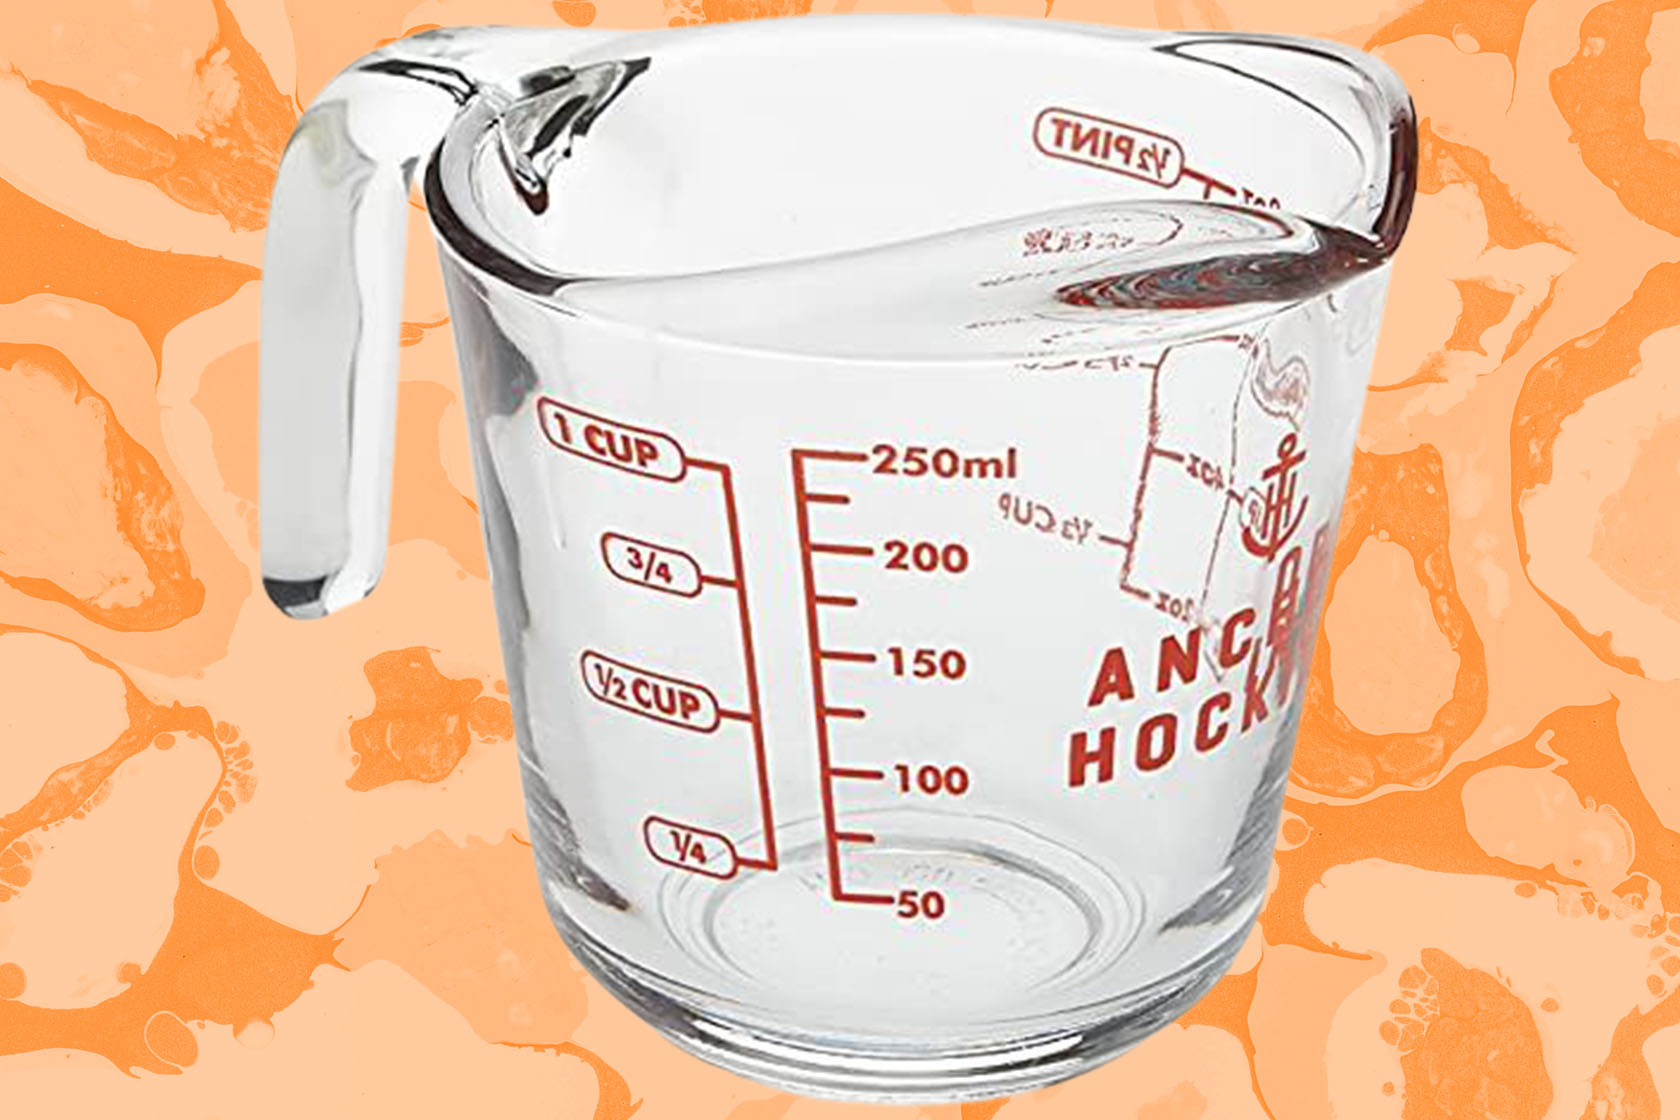 8-Ounce Anchor Hocking Glass Measuring Cup